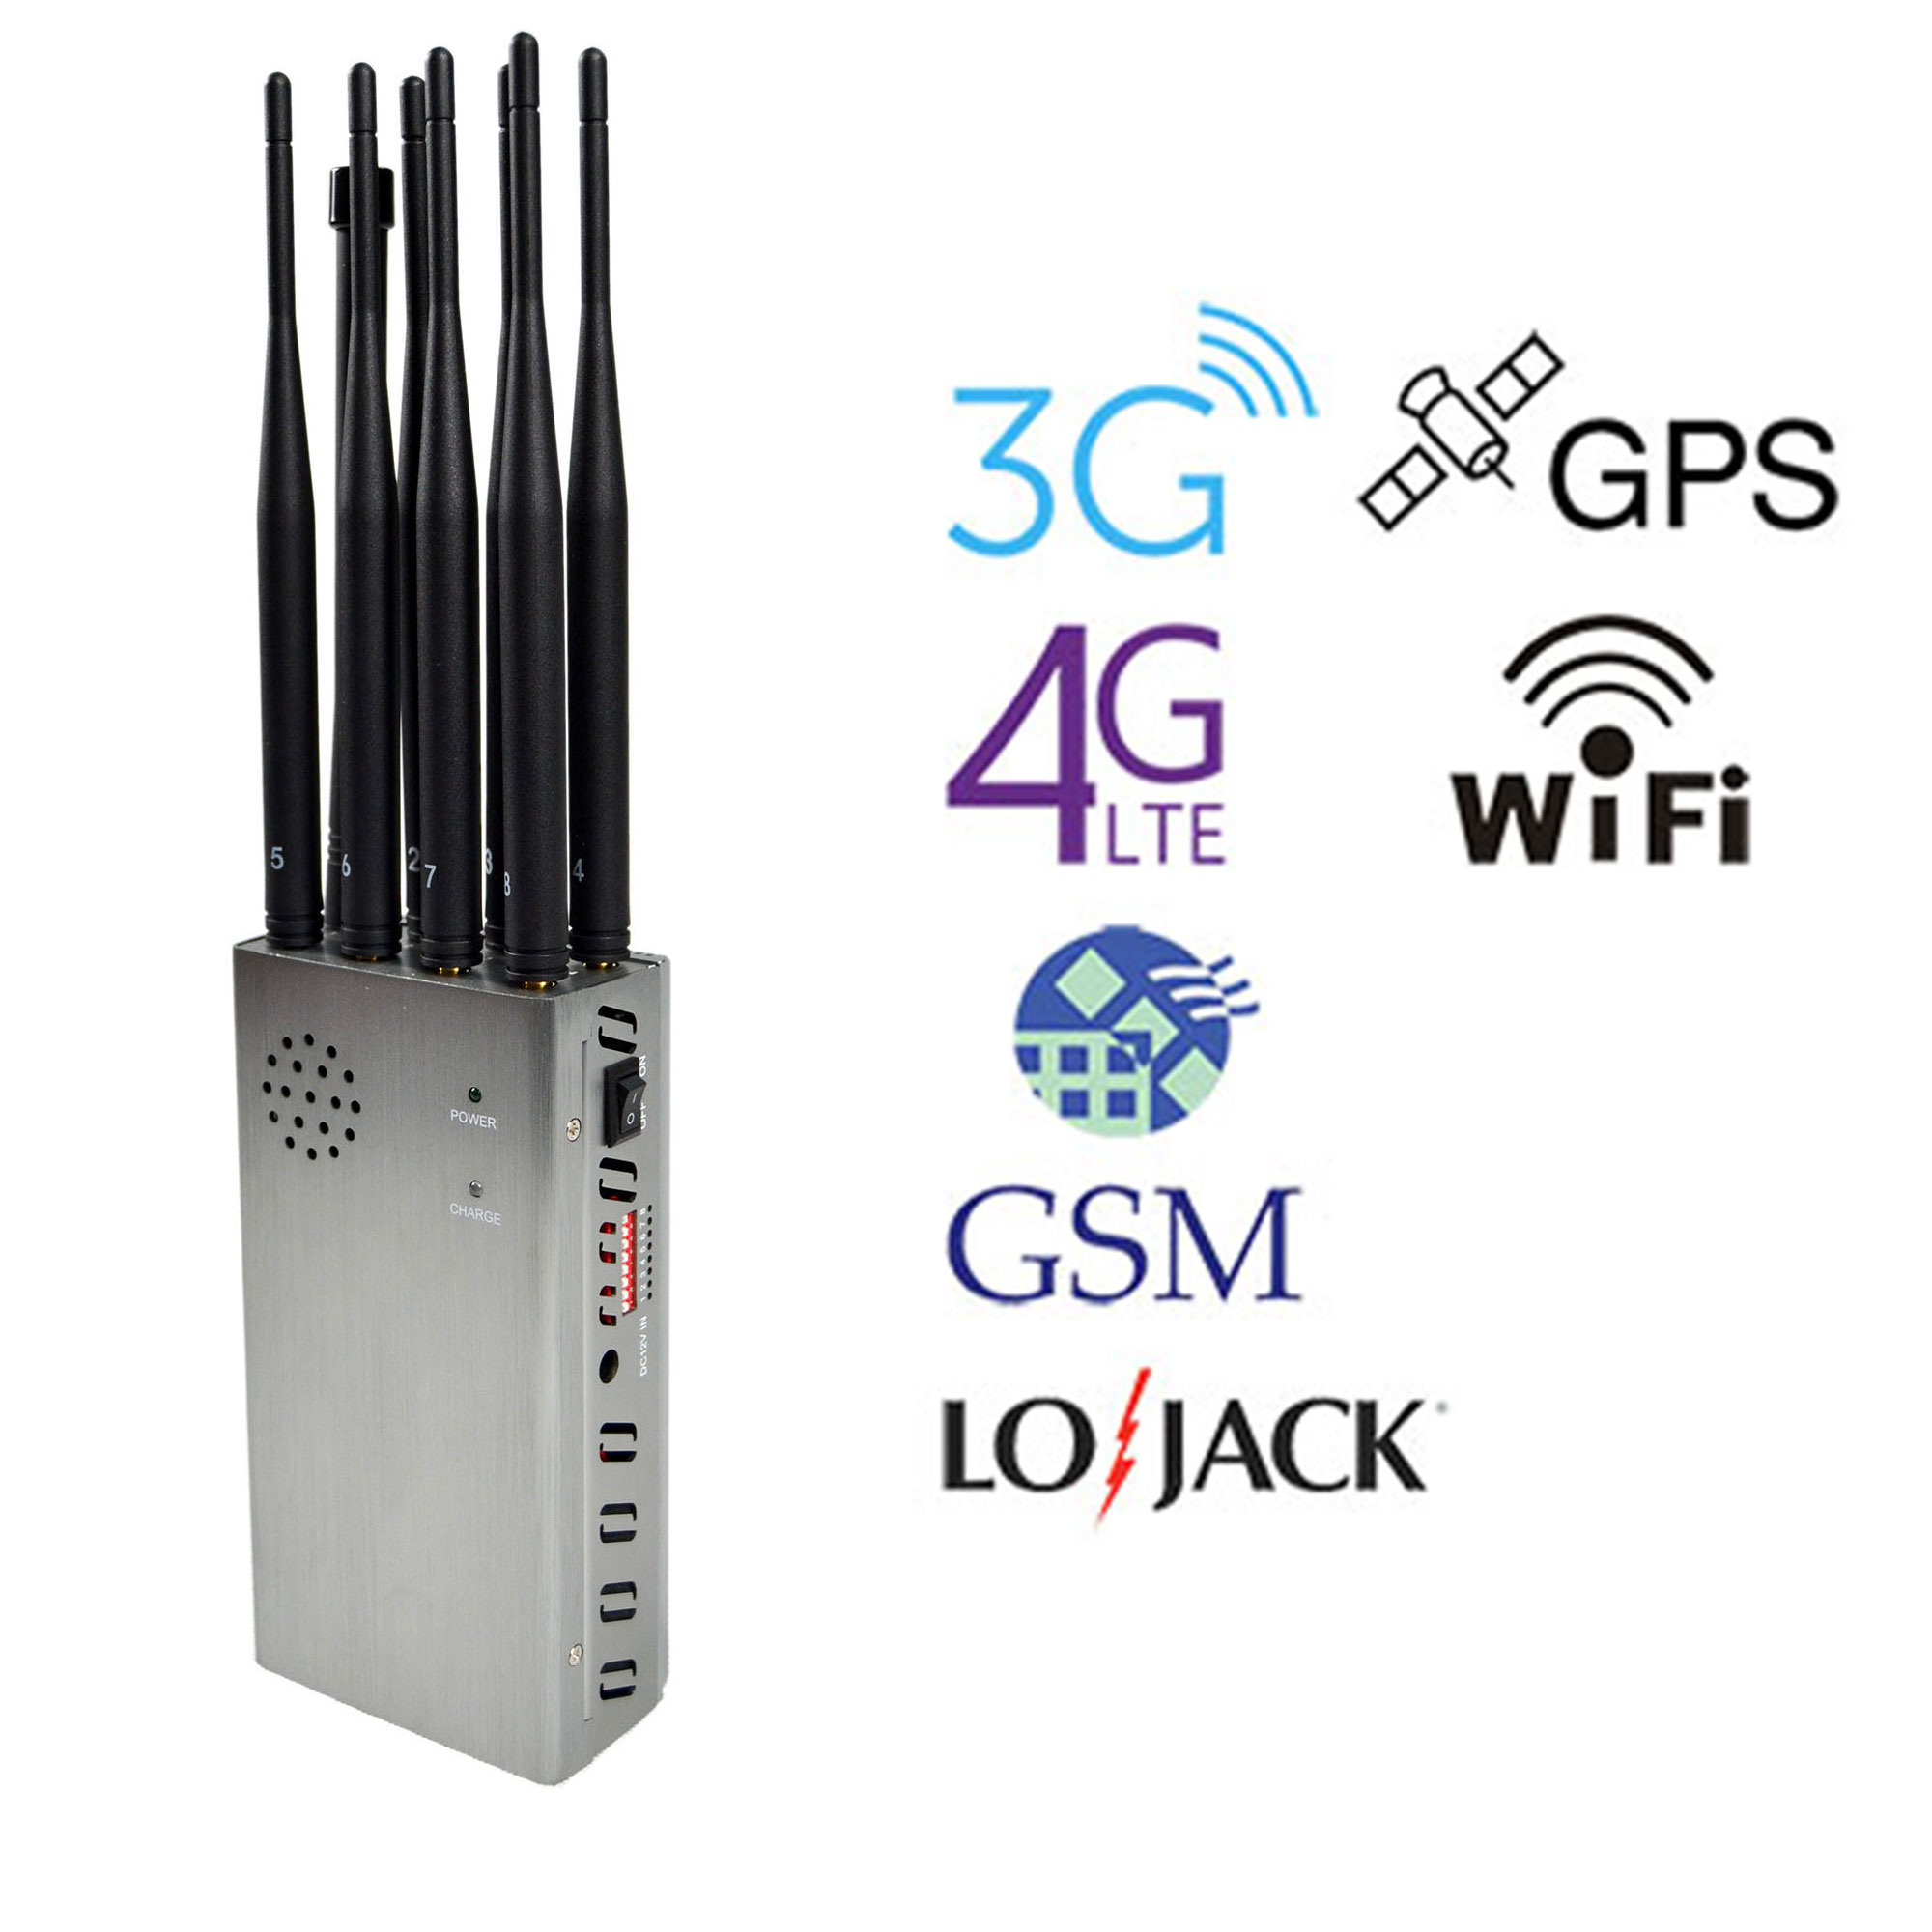 lidar radar jammer legality , Portable 8 Antennas Cell Phone Jammers With 2g 3G 4G And LOJACK GPS WIFI Signals